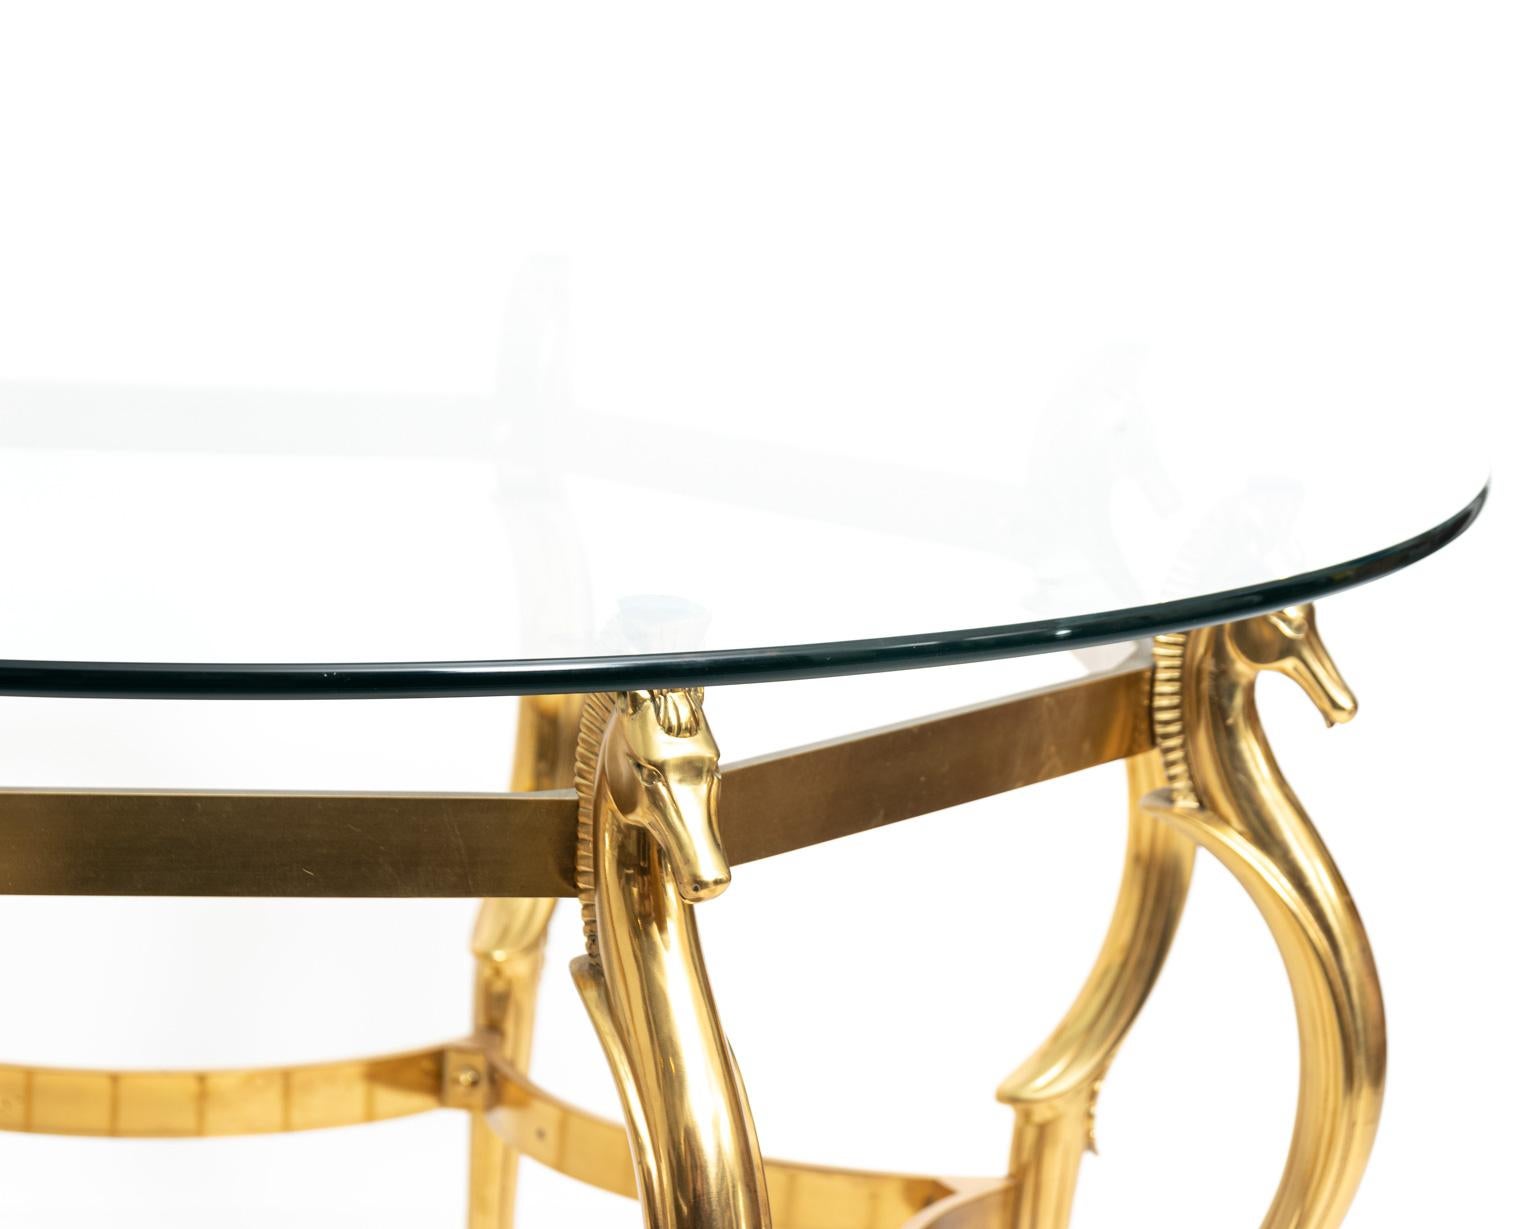 20th Century Midcentury Brass Cheval Horse Dining Table Attributed to Maison Jansen